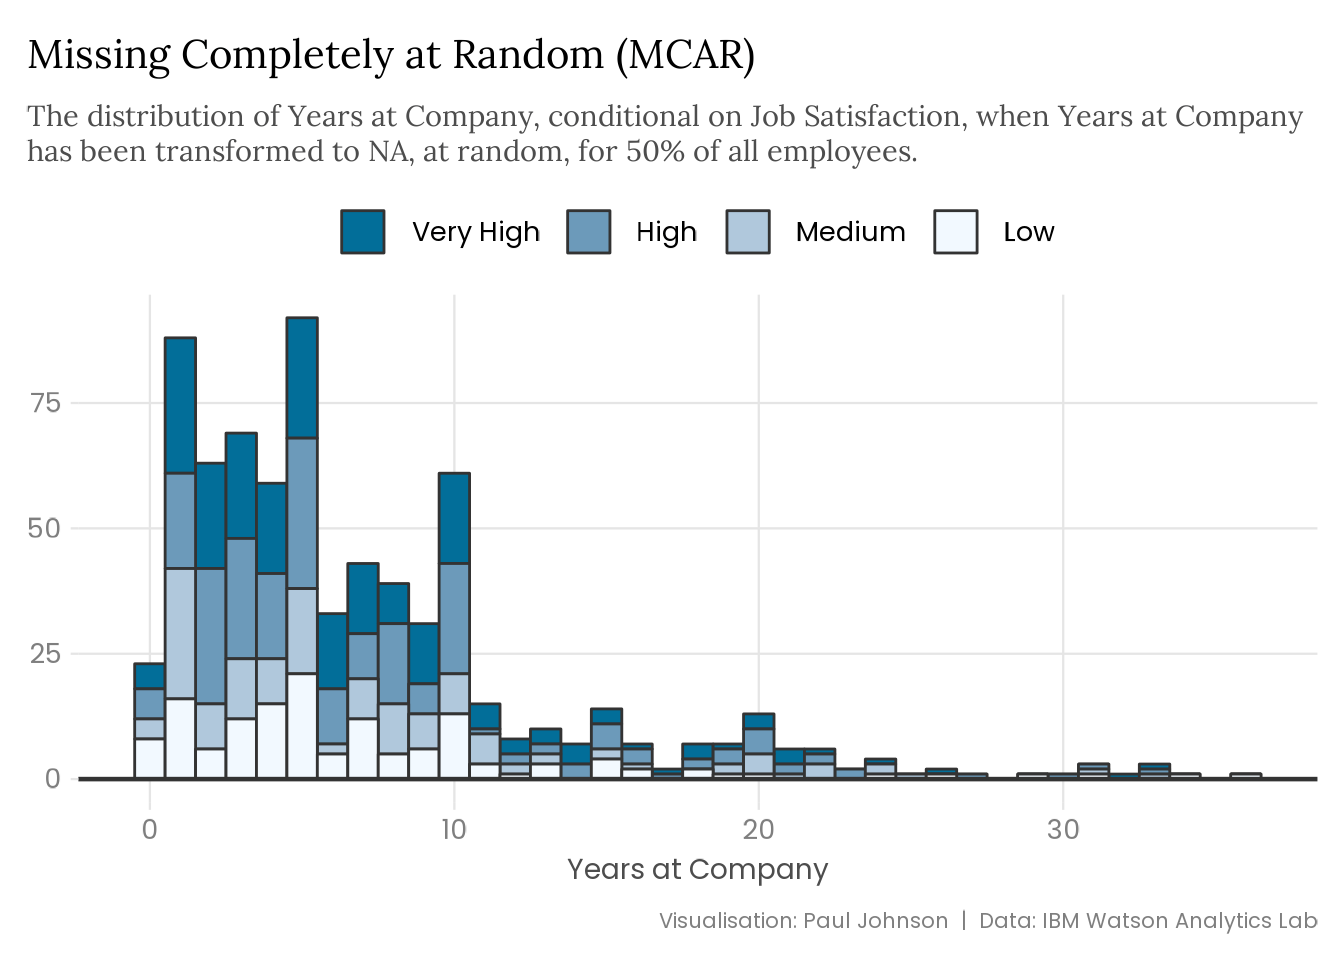 A histogram visualising the distribution of the total years that employees have worked at their company, conditional on their job satisfaction, with MCAR data. The shape of the distribution is similar to the original data distribution. 